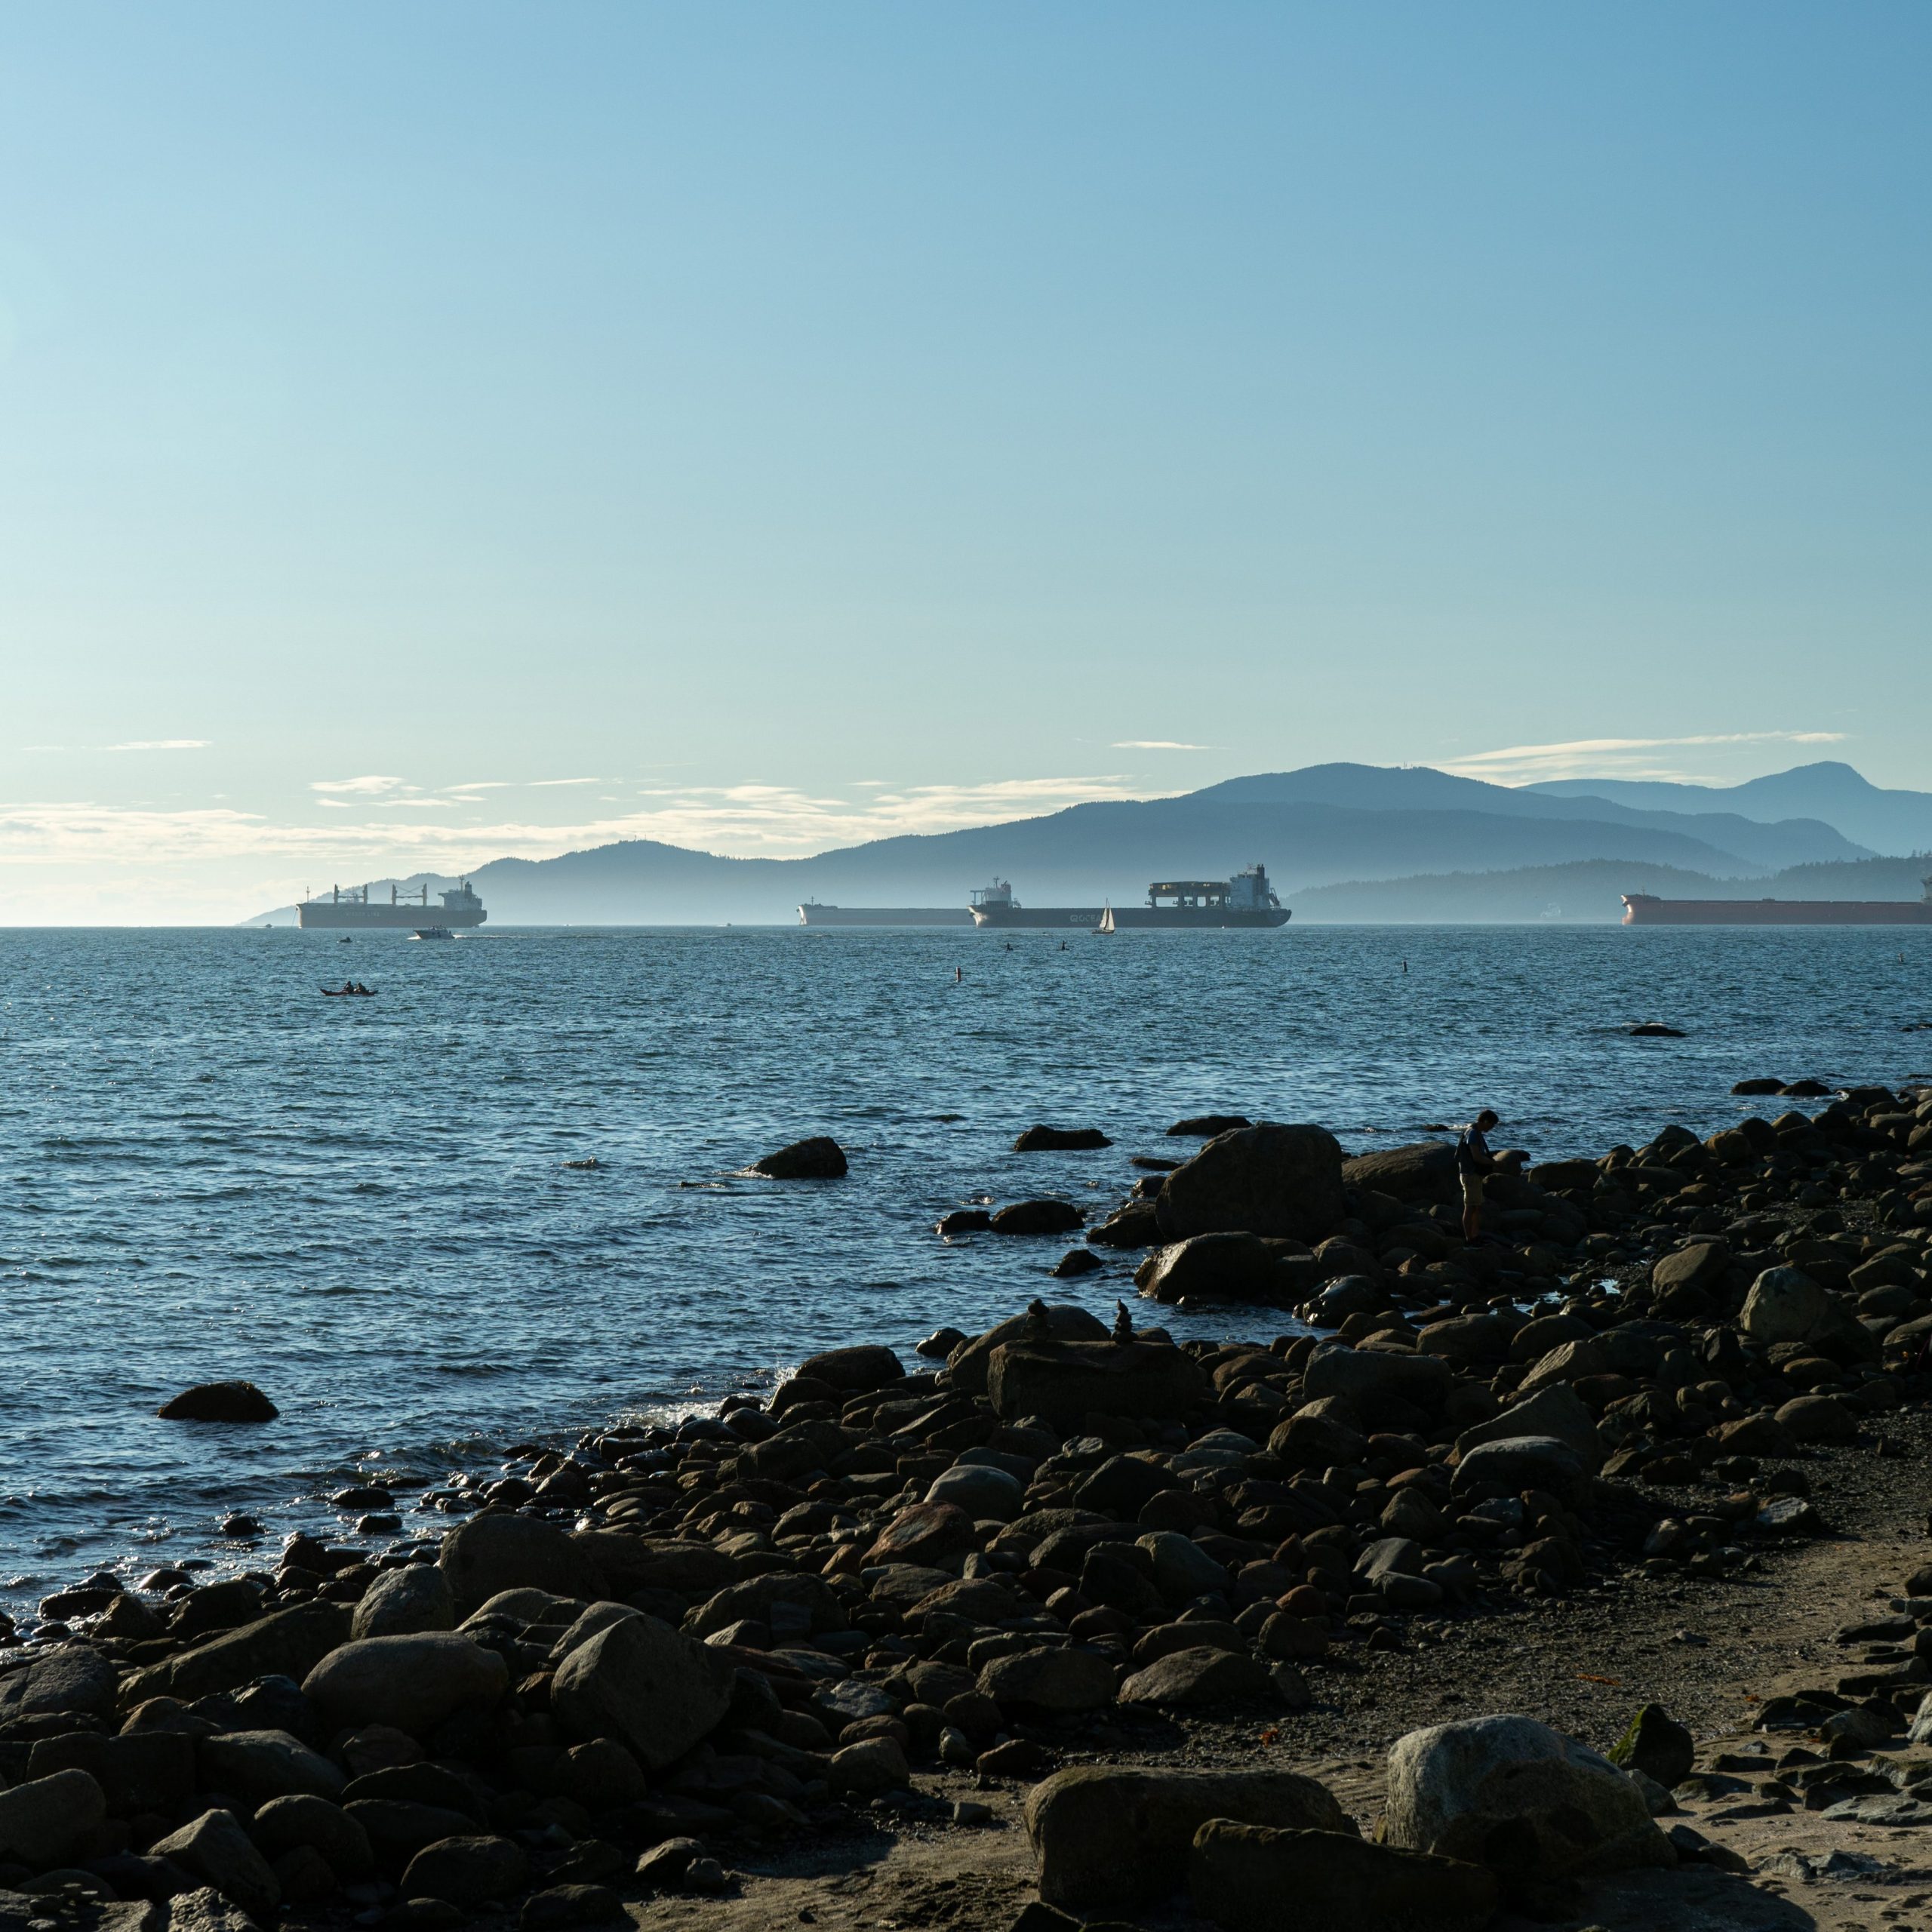 View from English Bay of tankers on the ocean